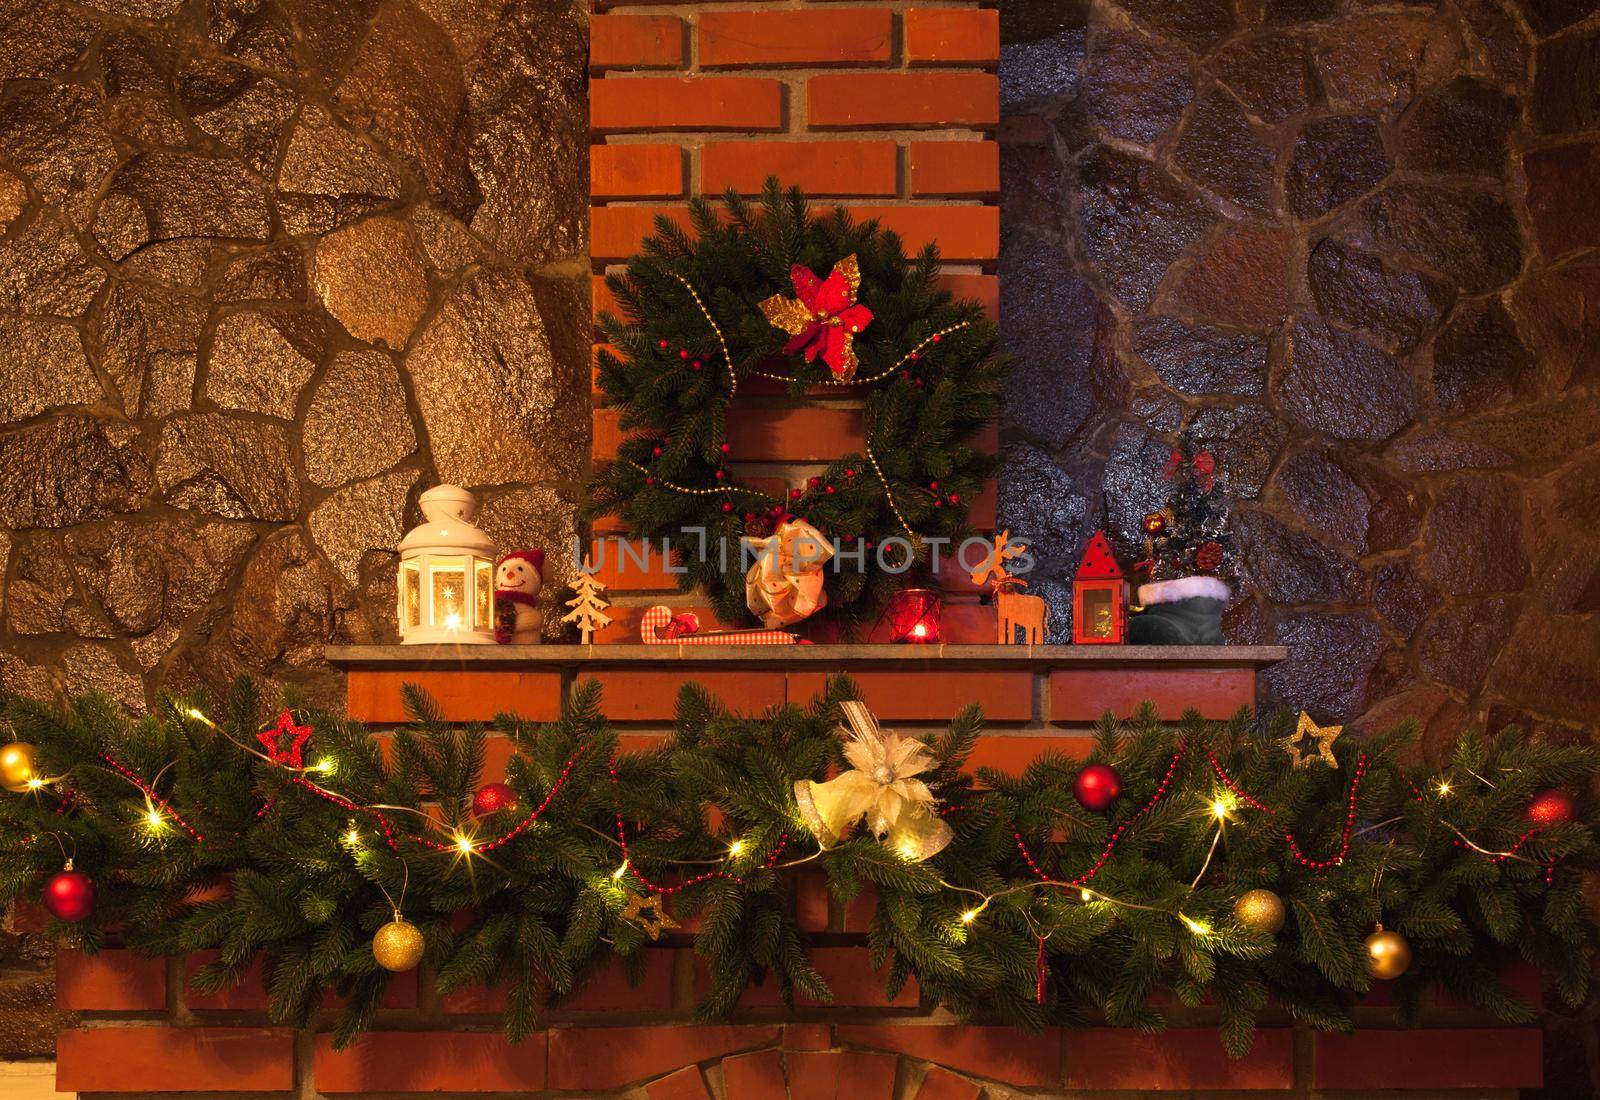 Christmas decorated fireplace by oksix